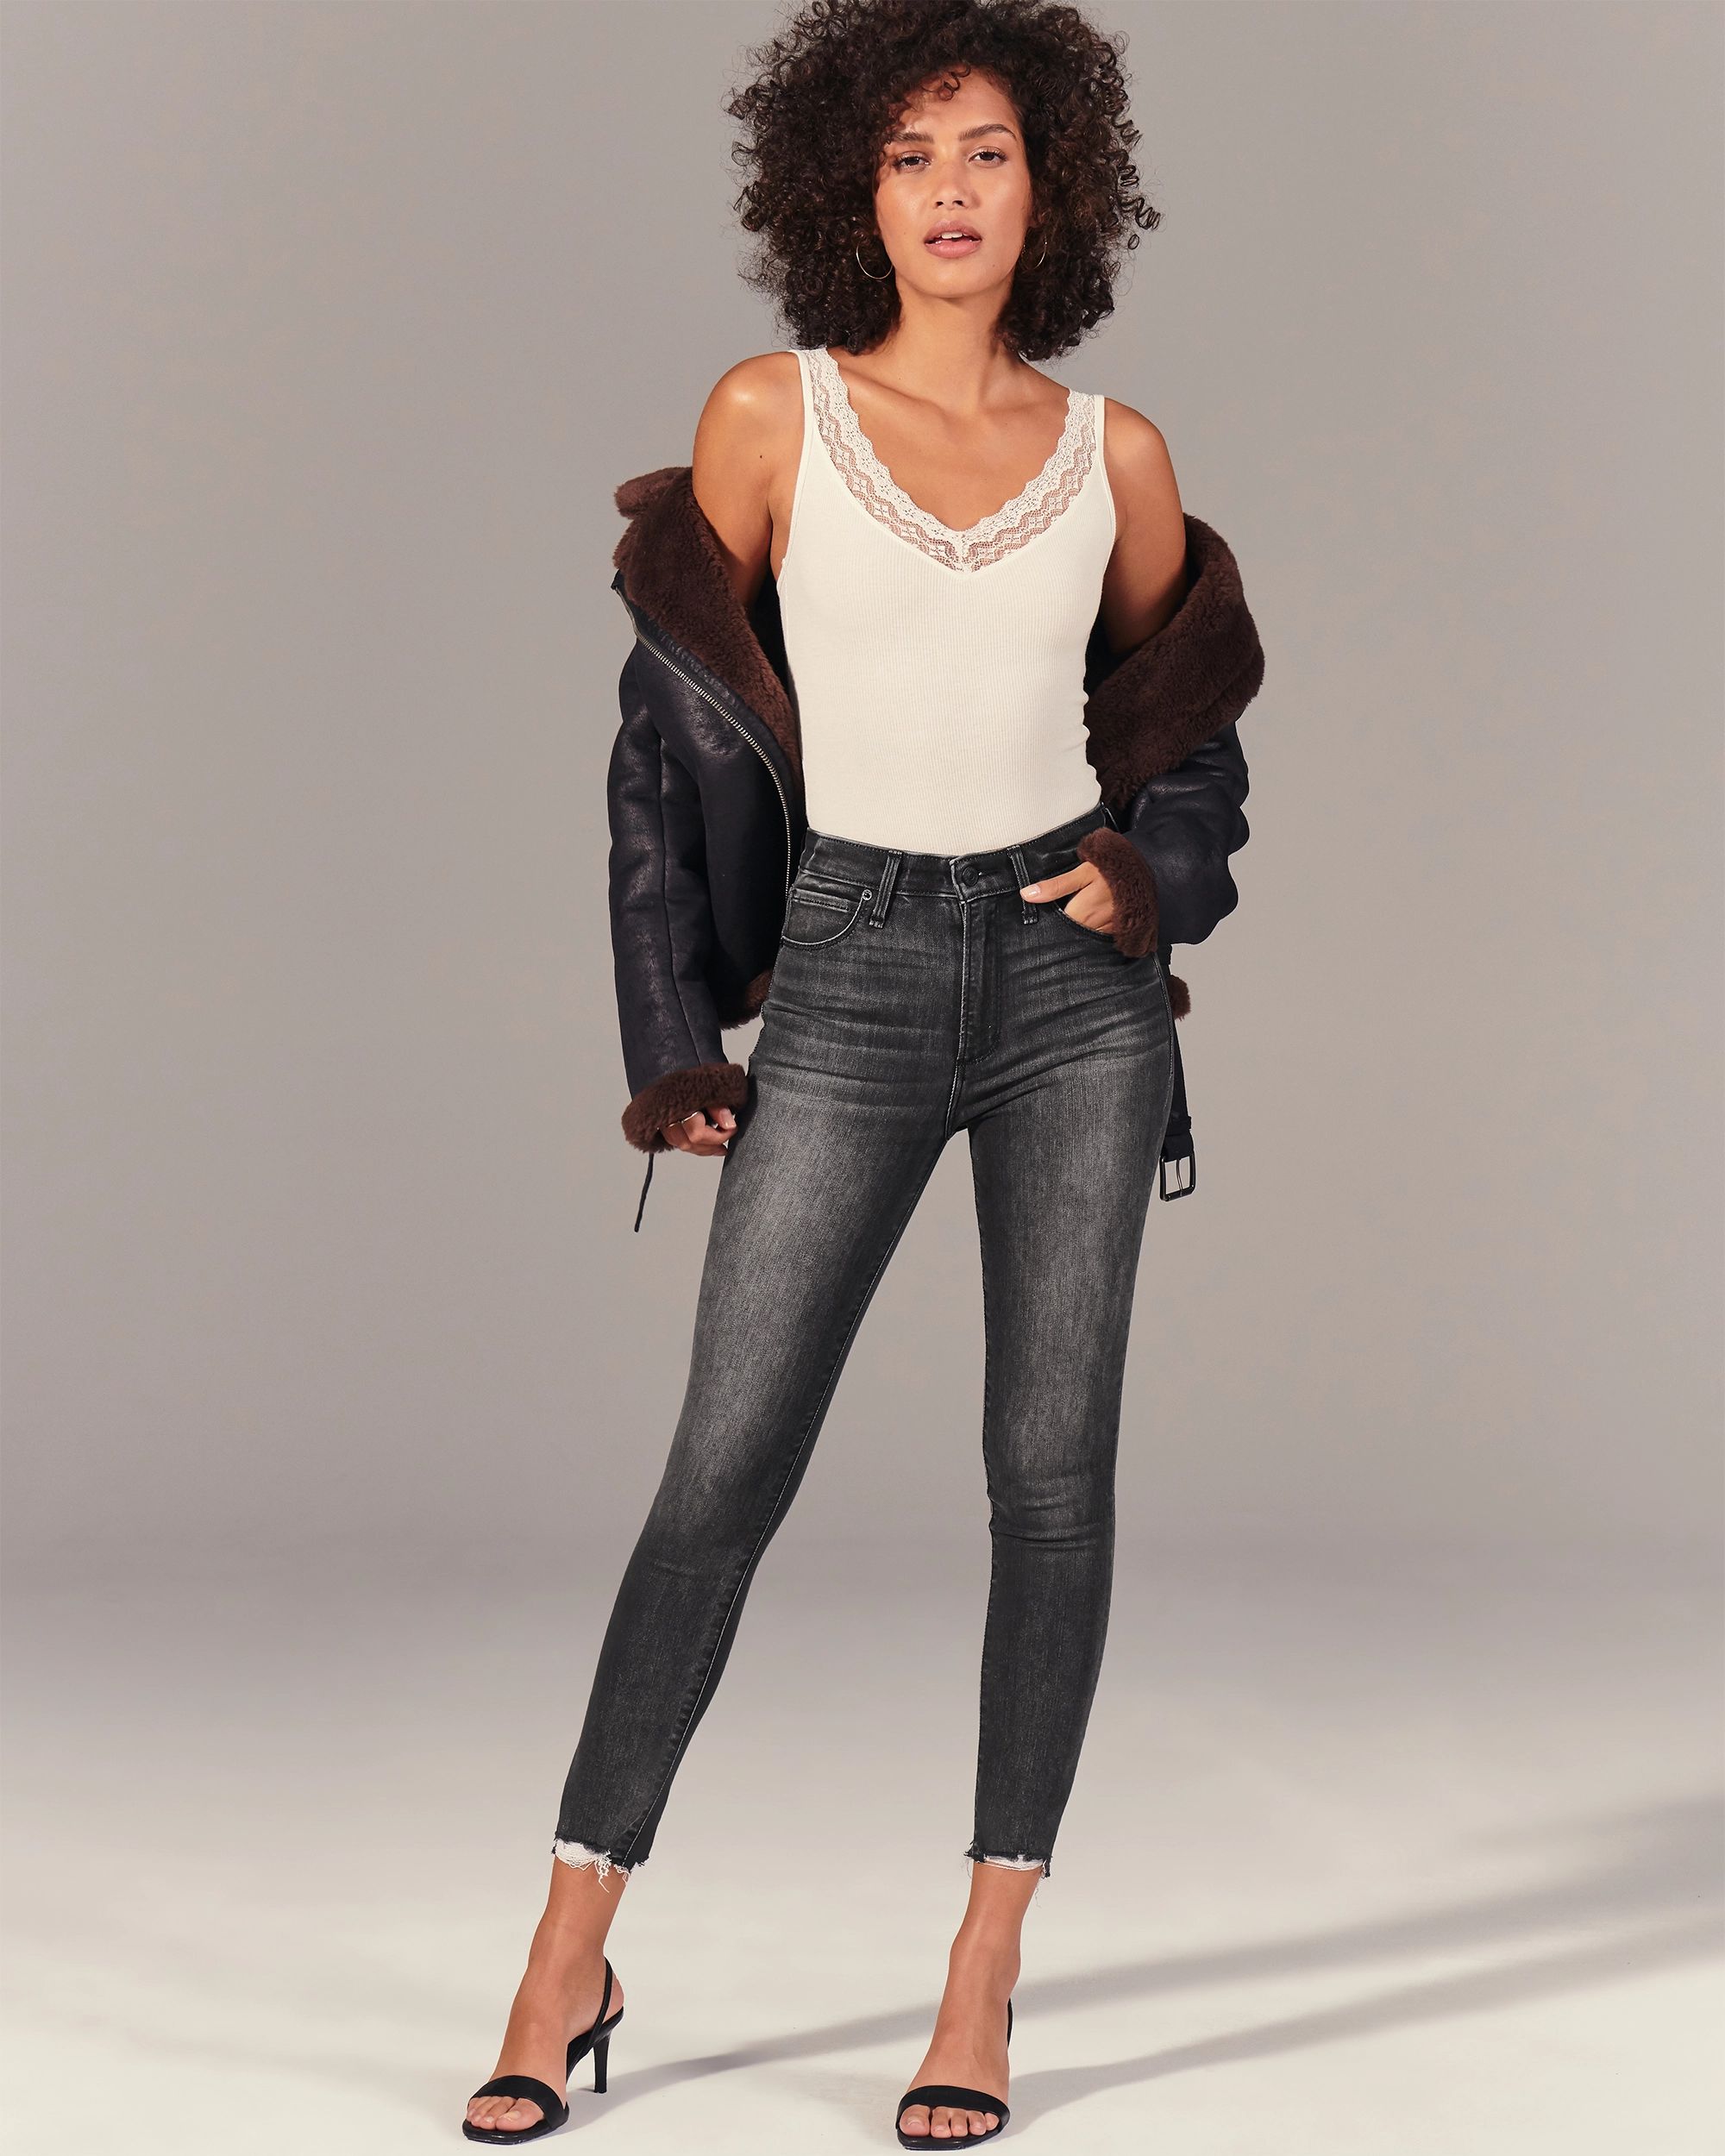 A&F Signature Stretch Denim | Online Exclusive
			


  
						High Rise Super Skinny Ankle Jeans
... | Abercrombie & Fitch (US)